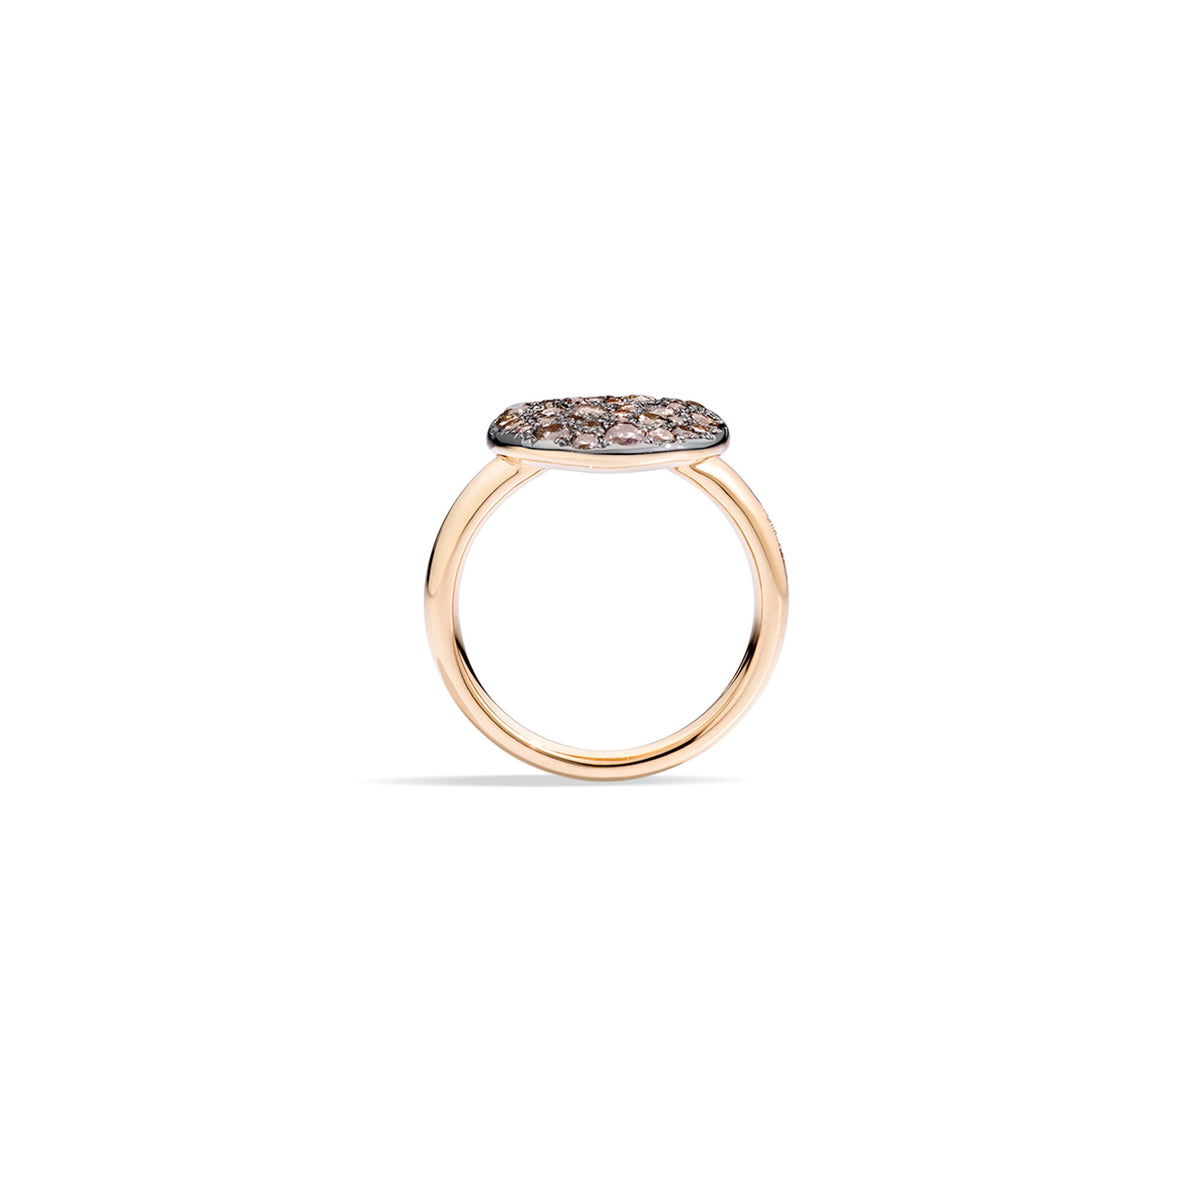 Sabbia Ring in 18k Rose Gold with Brown Diamonds large - Orsini Jewellers NZ